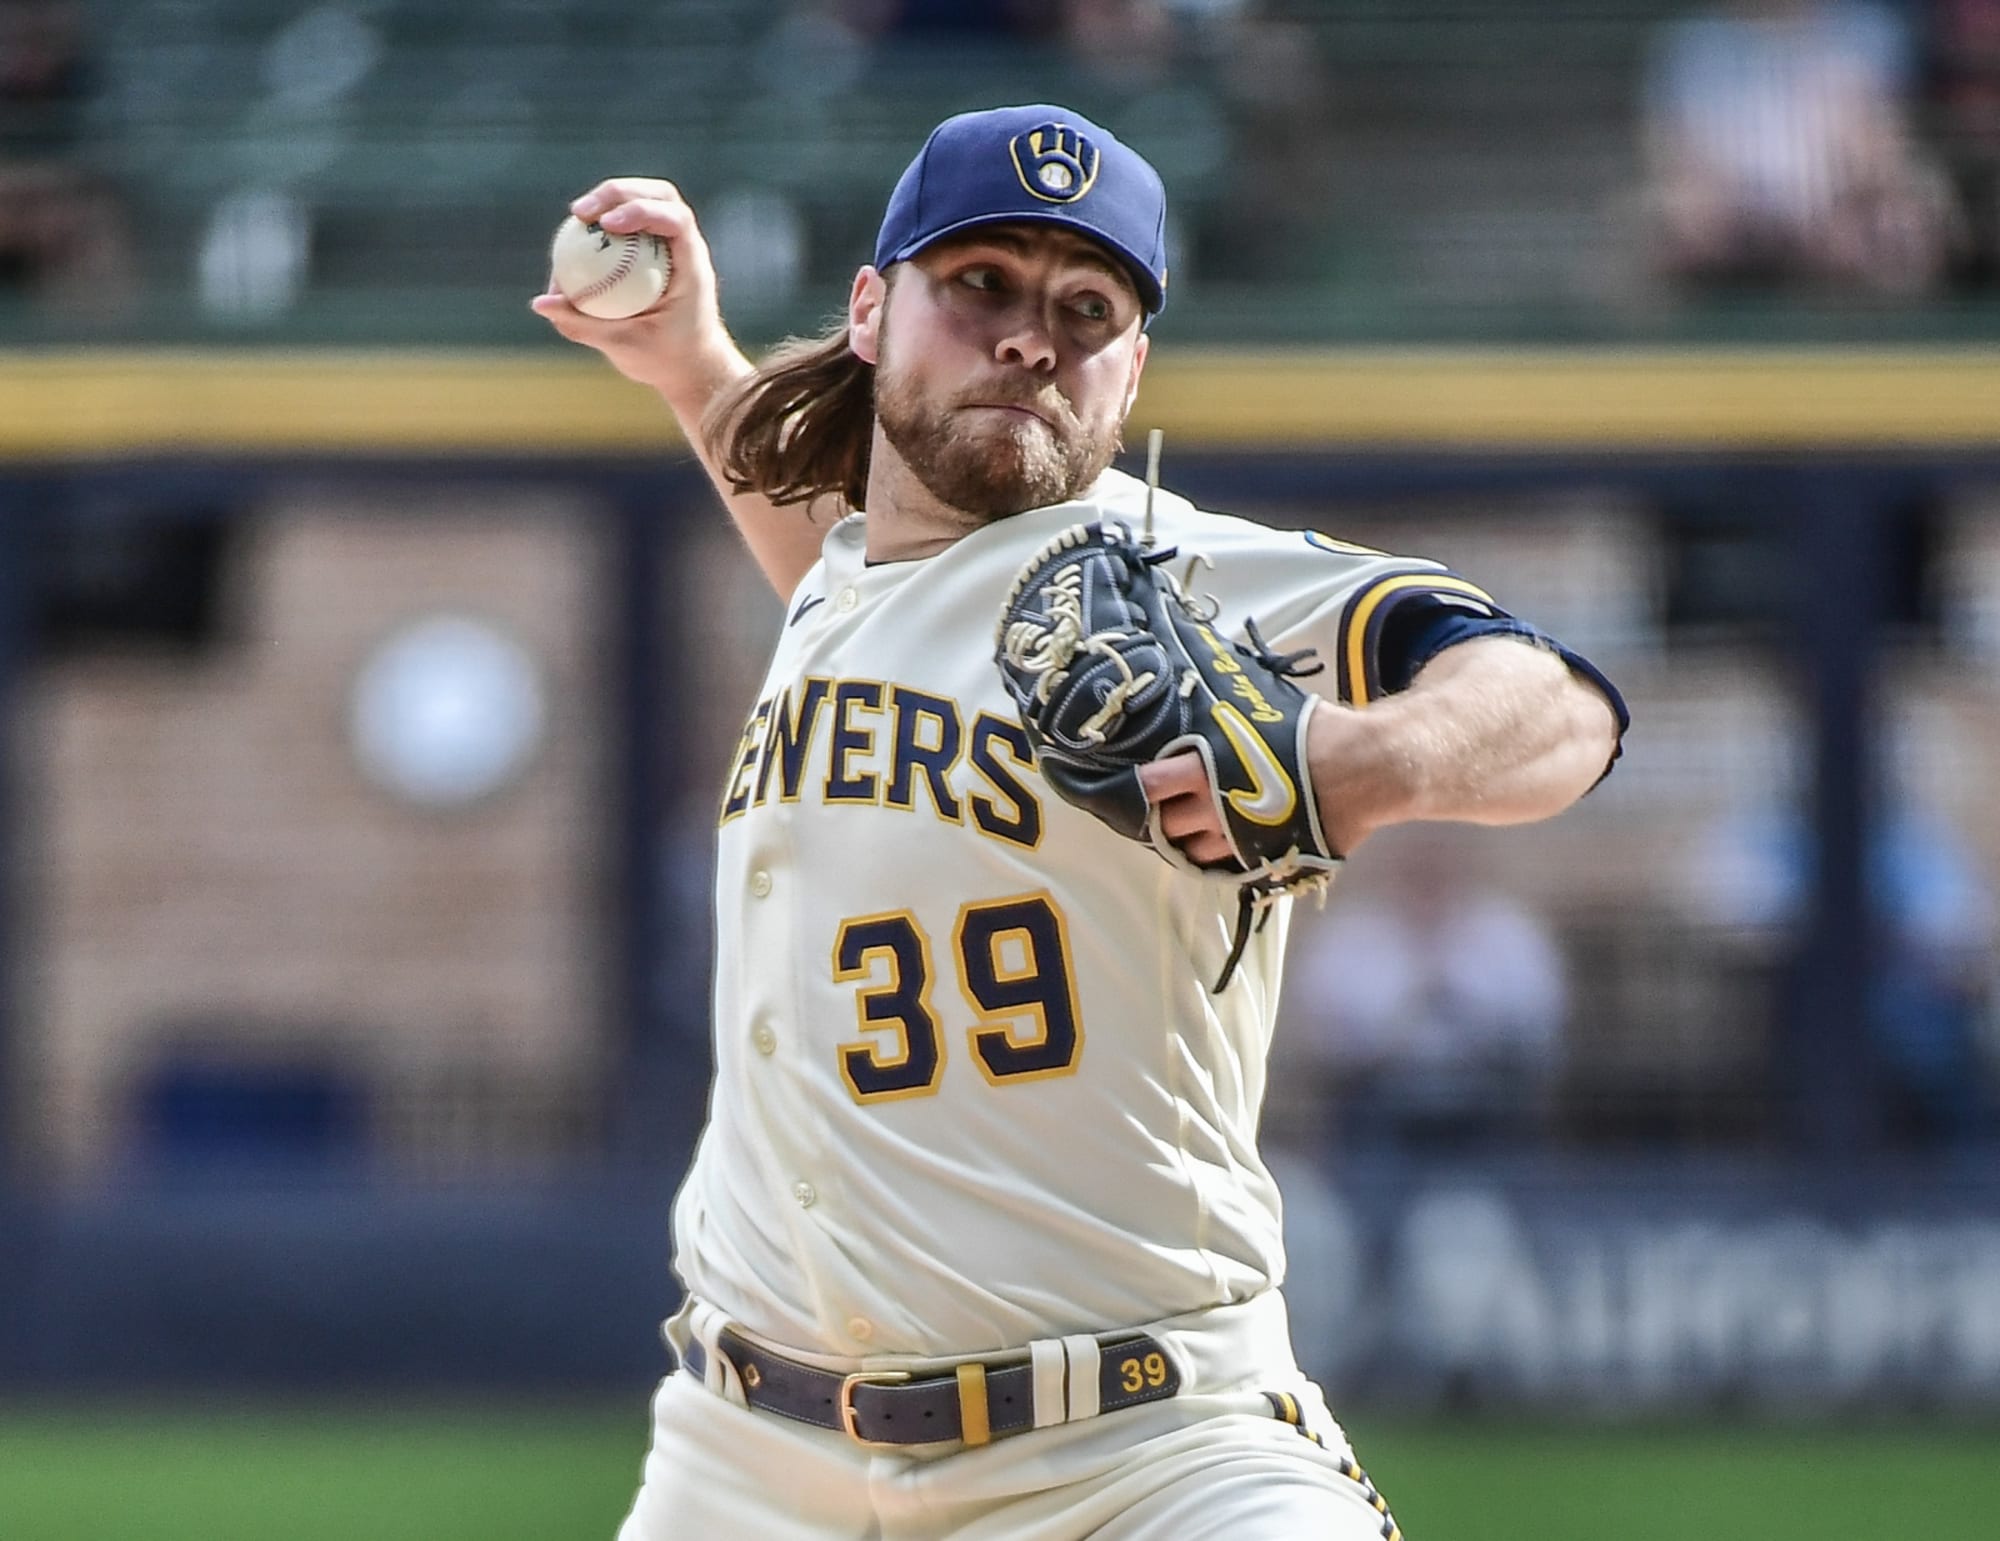 Corbin Burnes stung by Brewers' words in salary arbitration loss